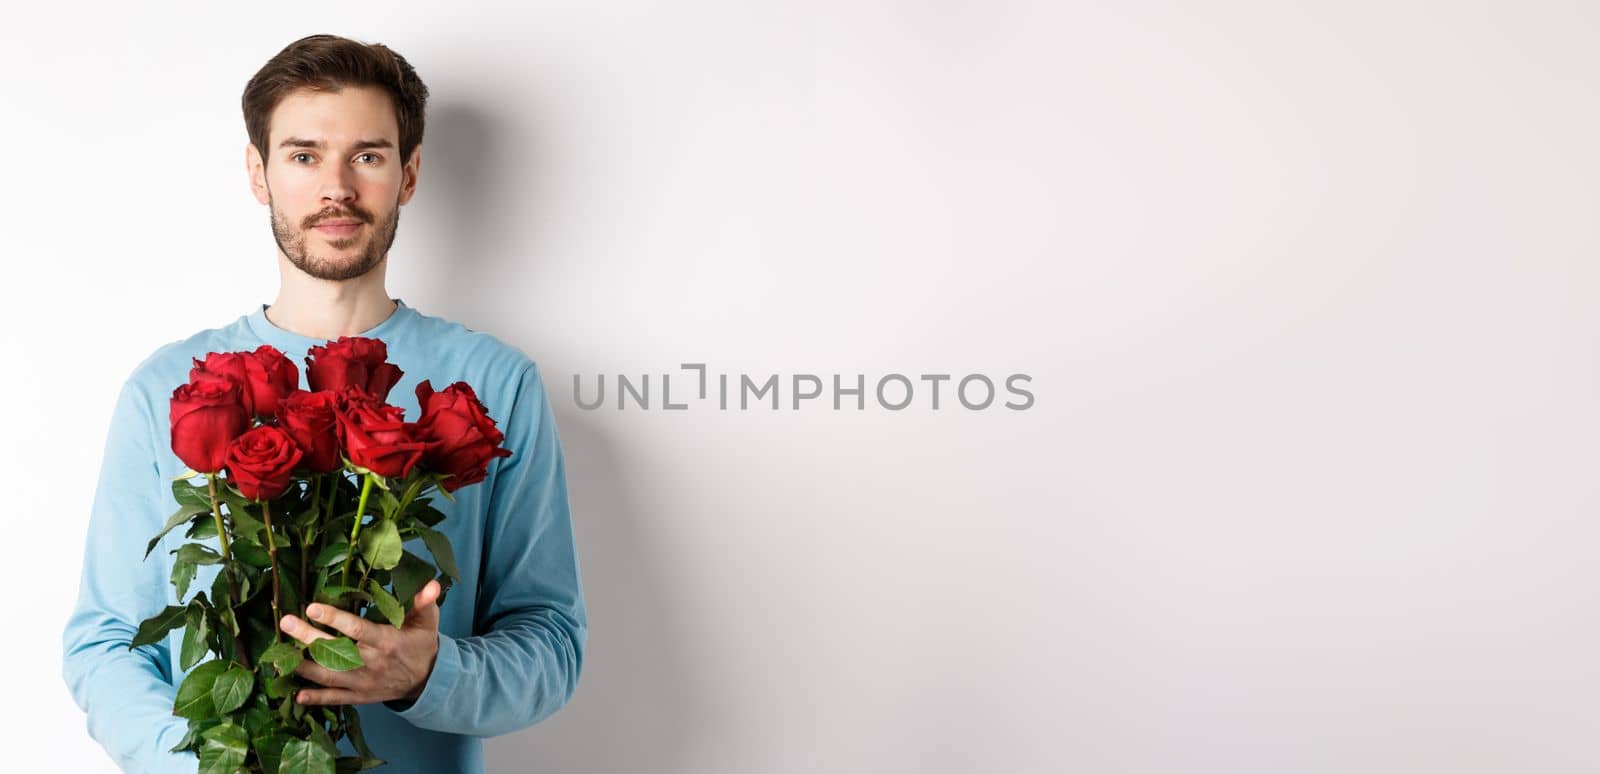 Confident young man bring flowers on Valentines day date, holding romantic bouquet, standing over white background.